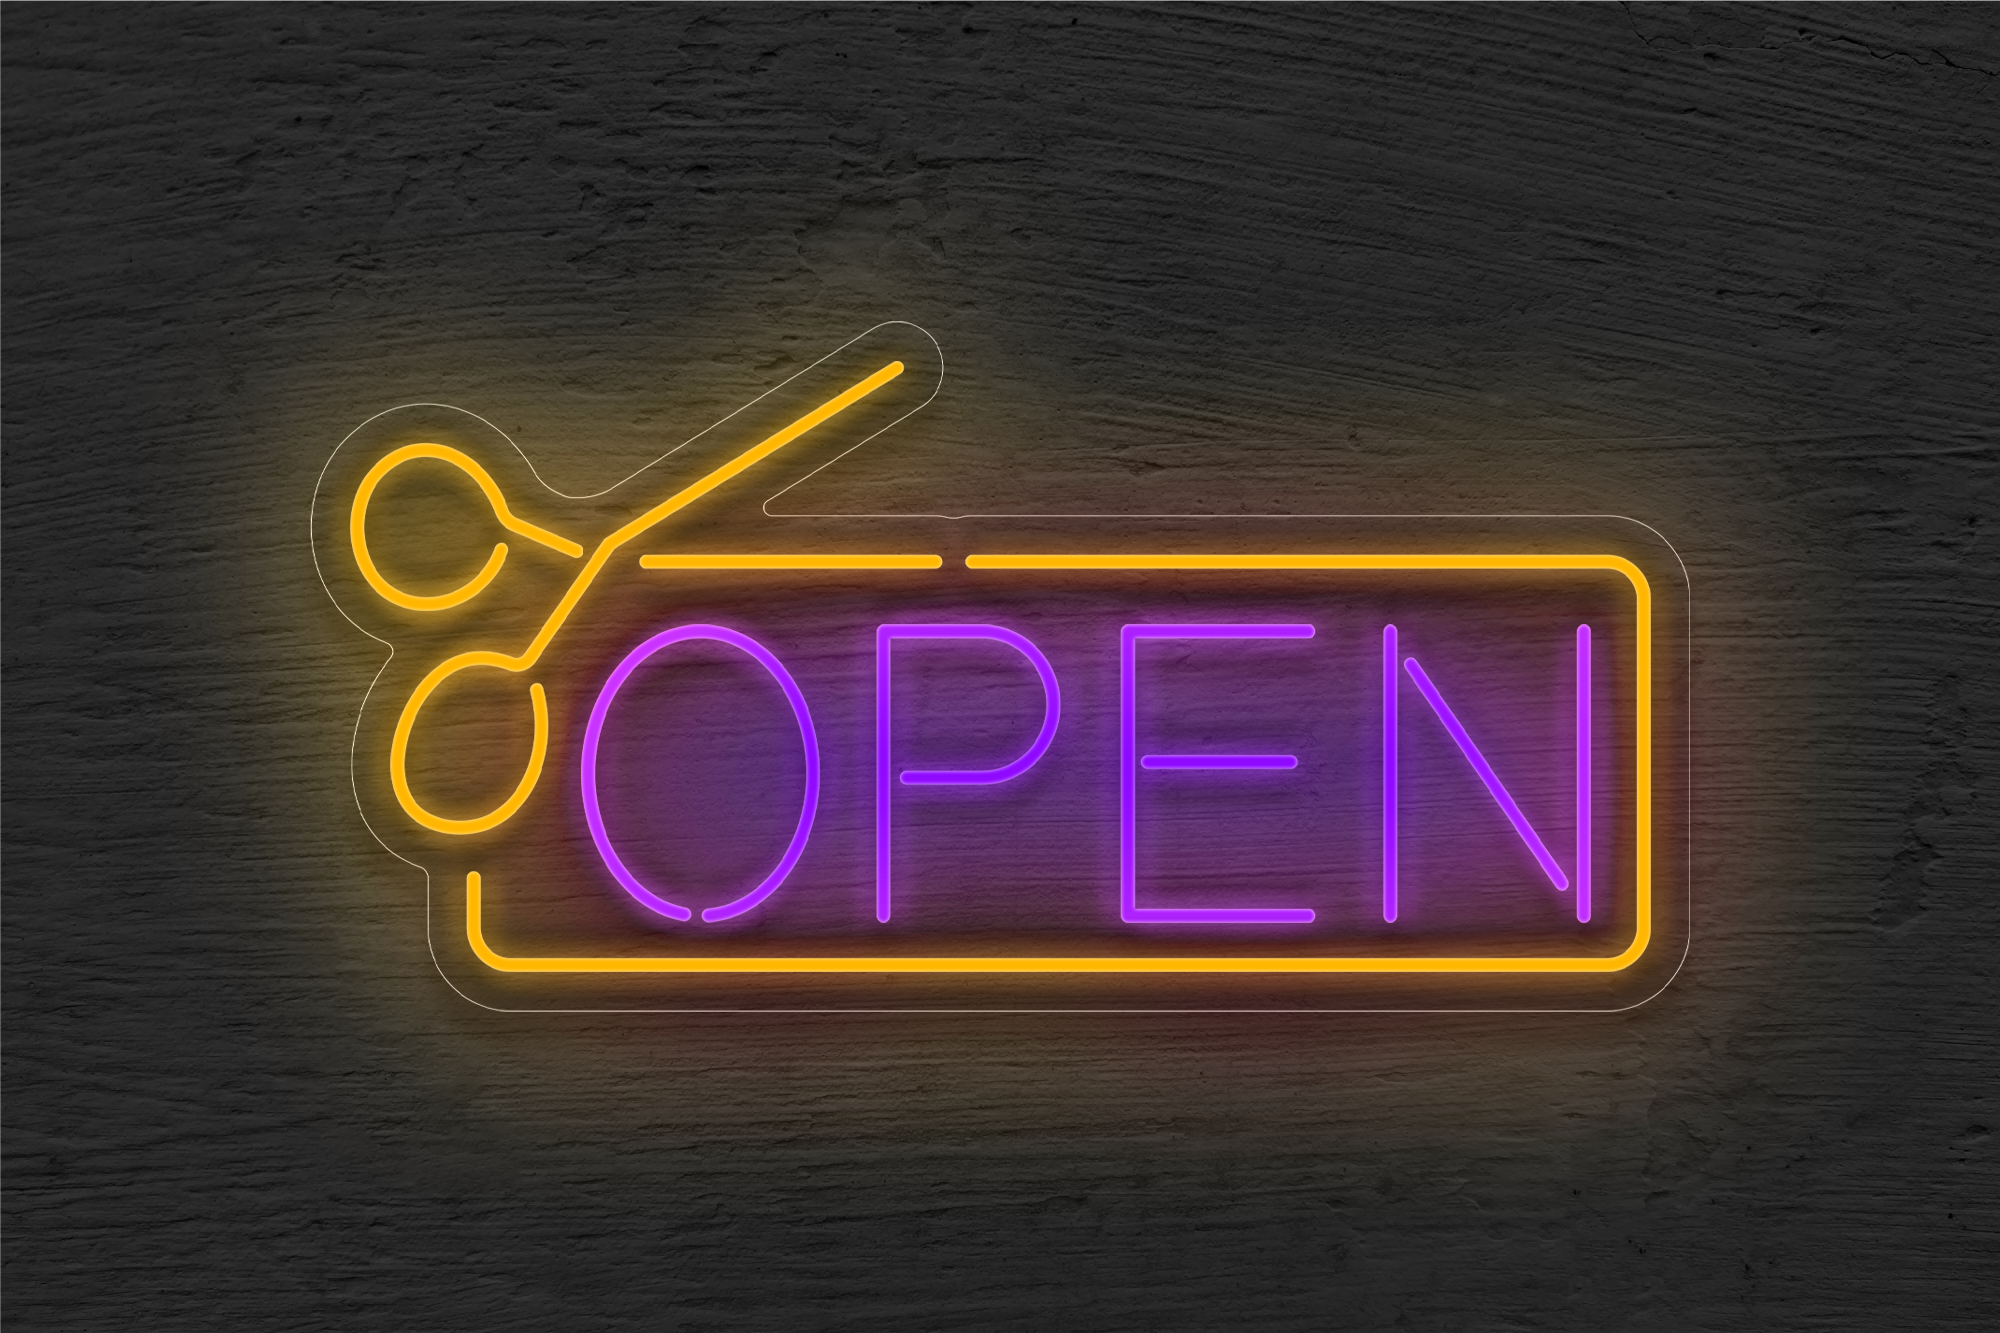 "OPEN" with Border and Scissor LED Neon Sign